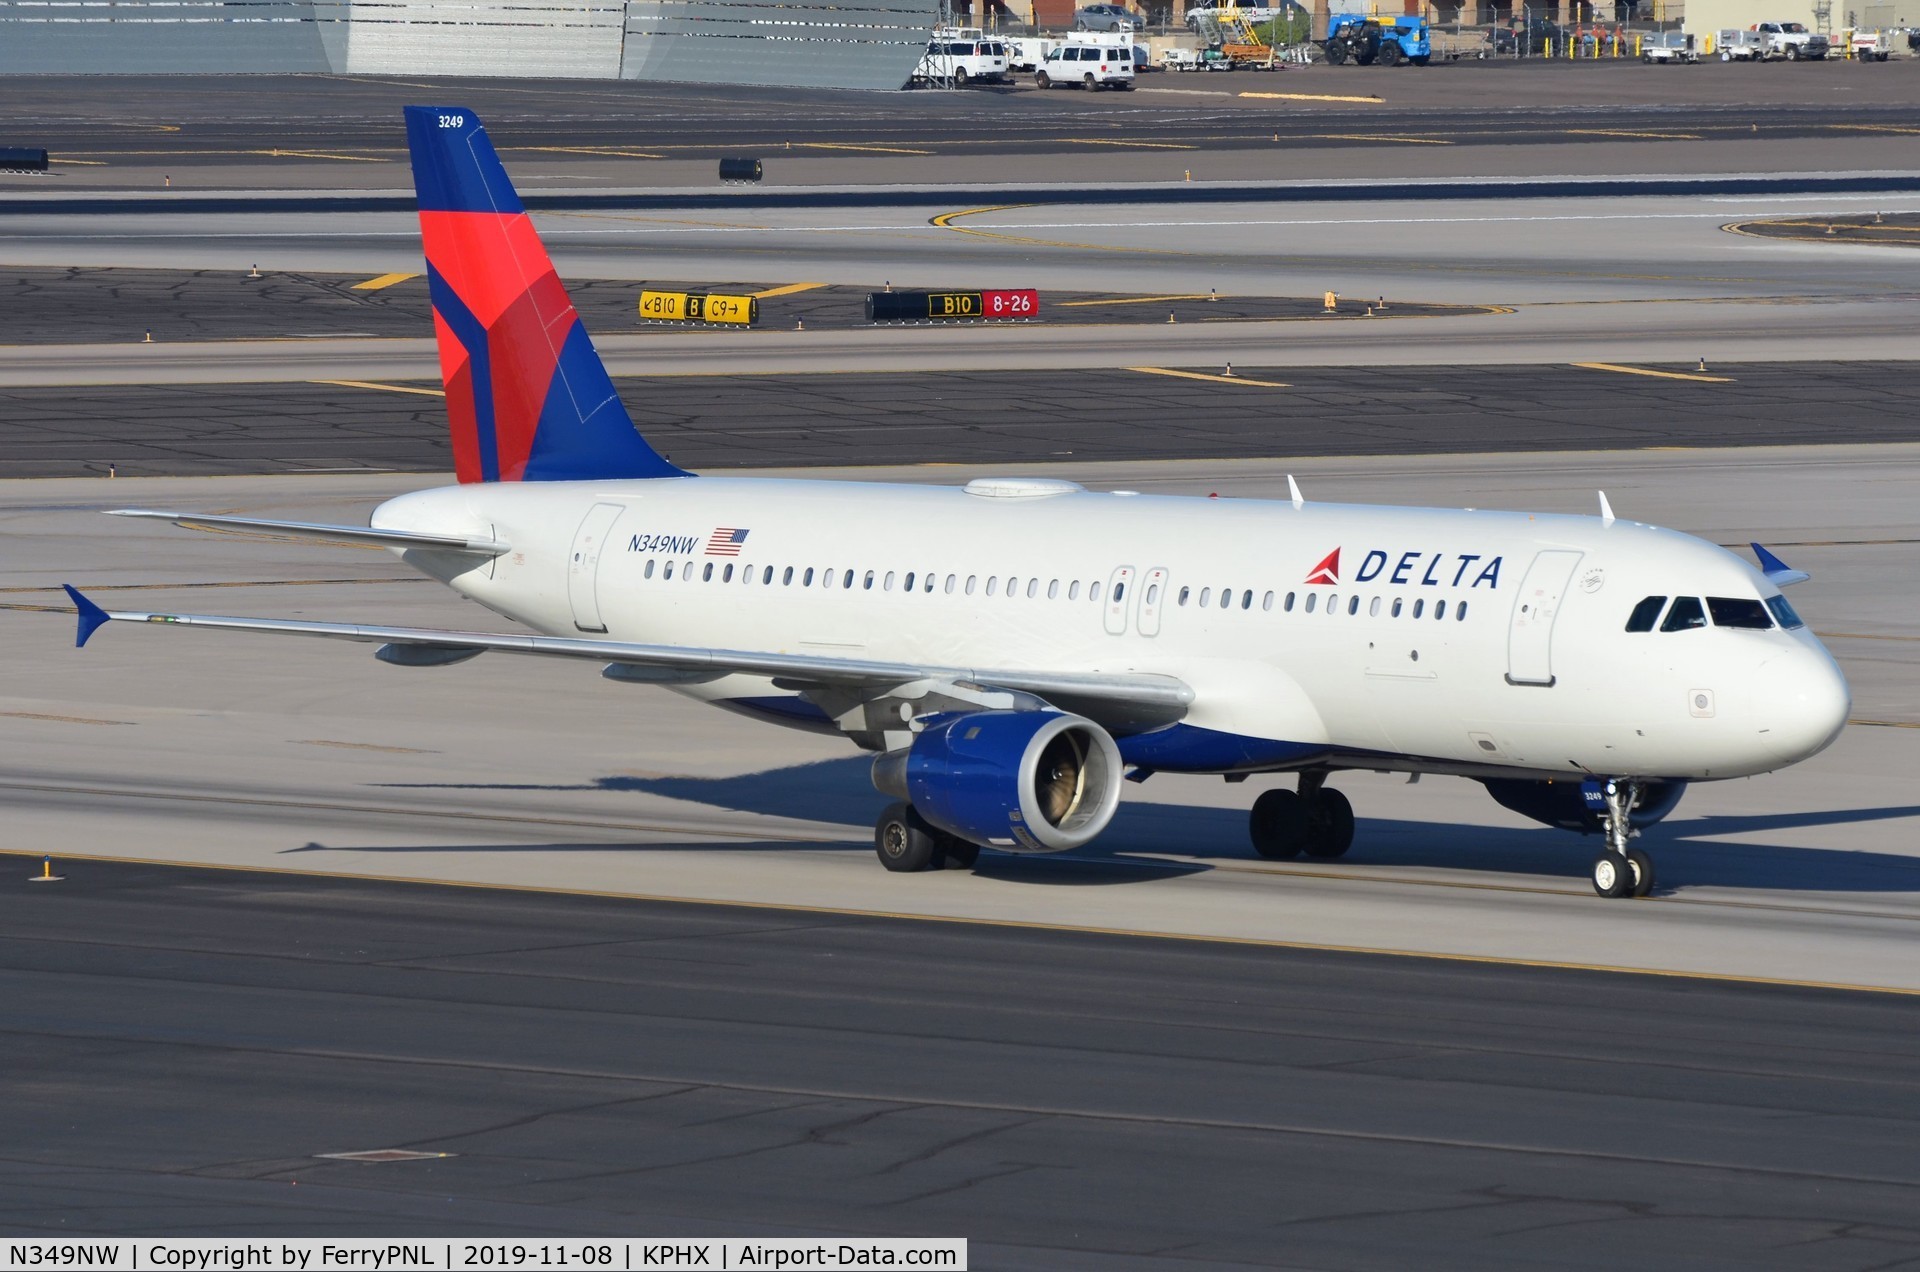 N349NW, 1993 Airbus A320-212 C/N 417, Arrival of Delta A320